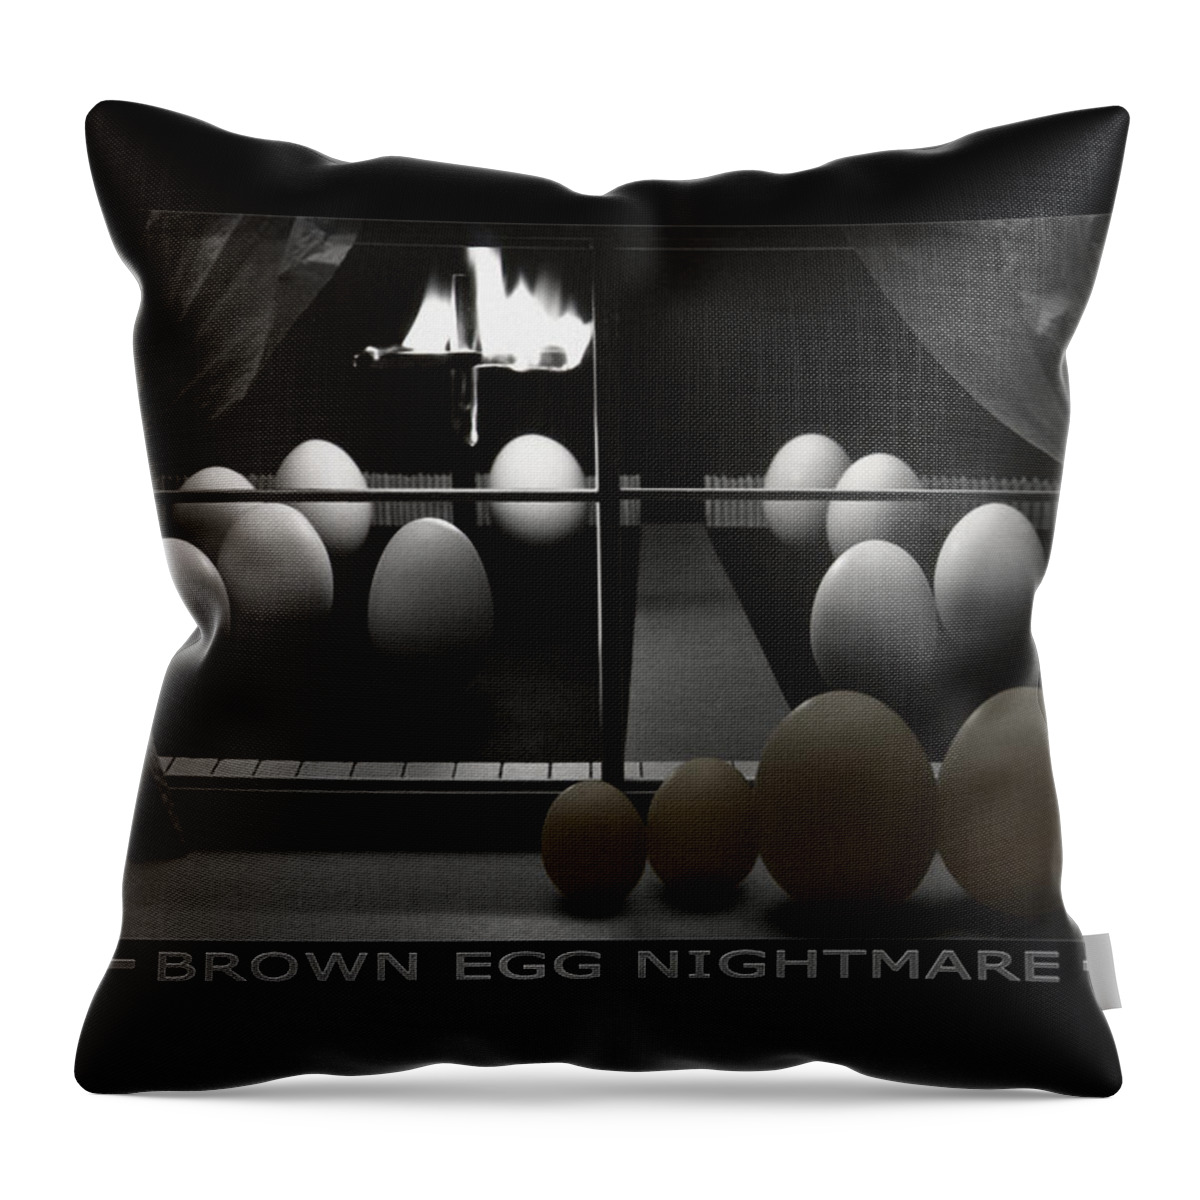 Kkk Throw Pillow featuring the photograph Brown Egg Nightmare by Mike McGlothlen